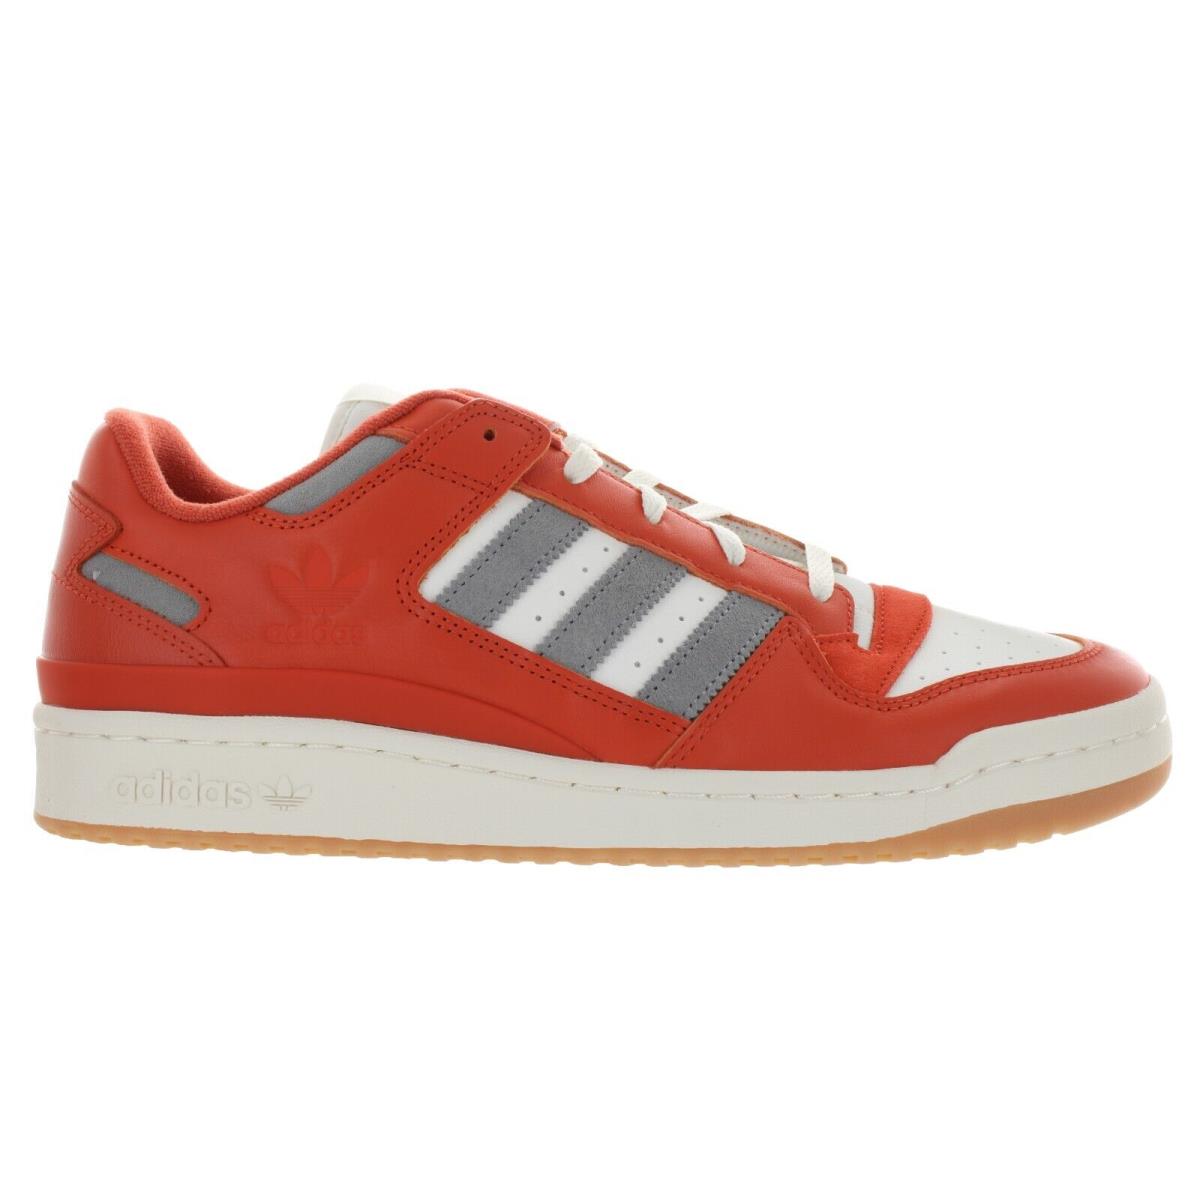 Adidas Men`s Originals Forum Low Classic Red - White Shoes Multiple Size - Preloved Red, Off White, Charcoal Solid Grey